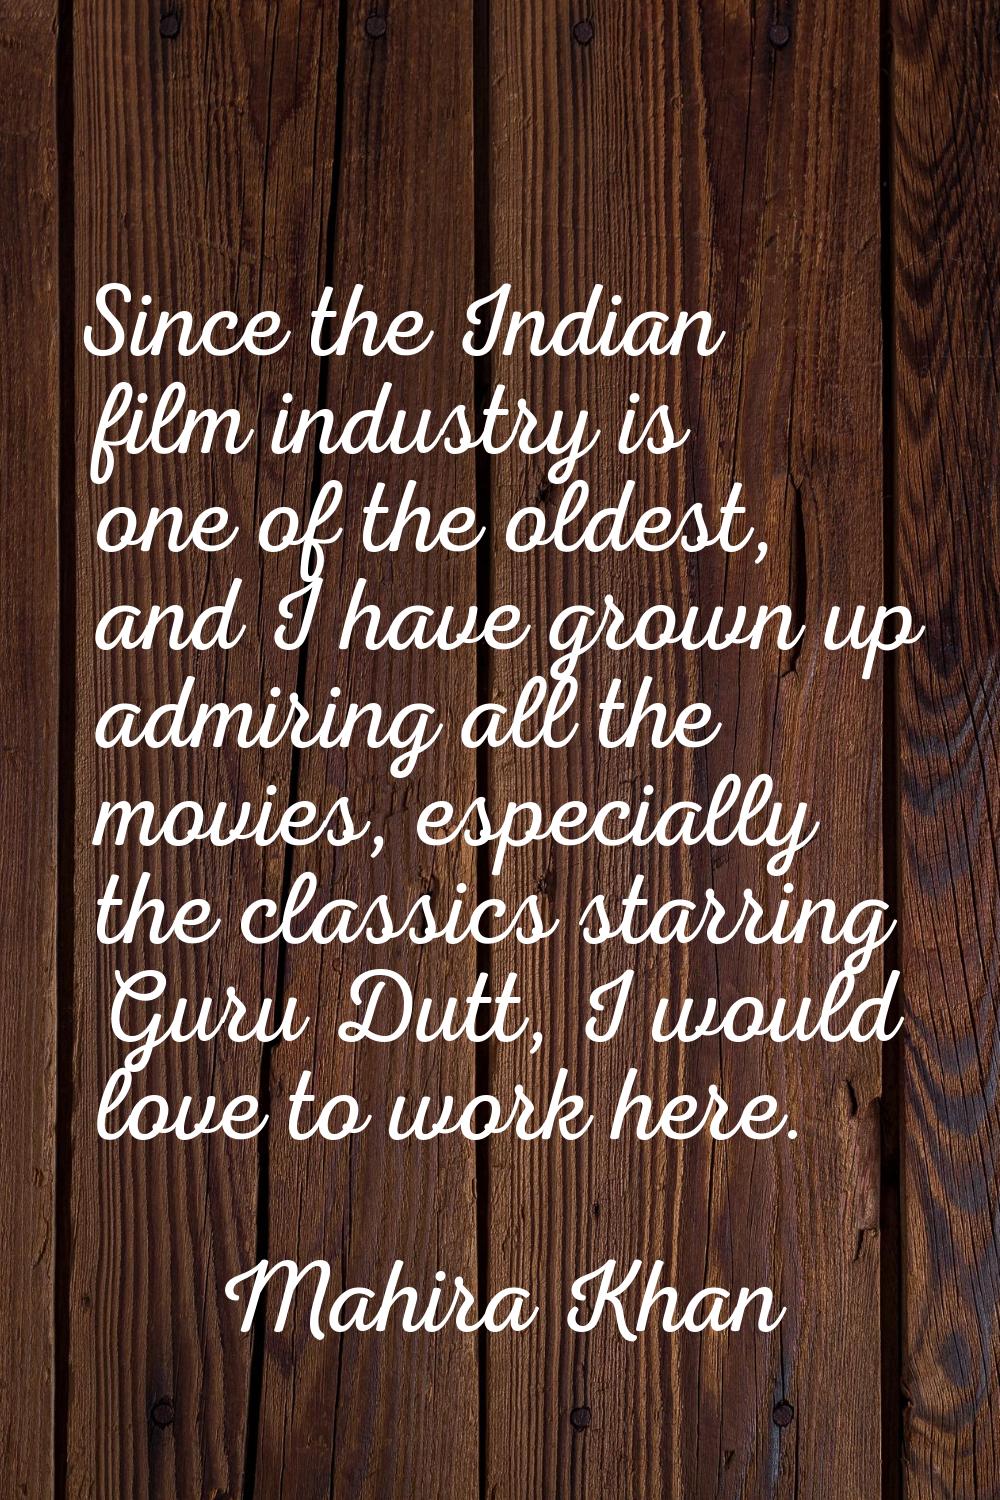 Since the Indian film industry is one of the oldest, and I have grown up admiring all the movies, e